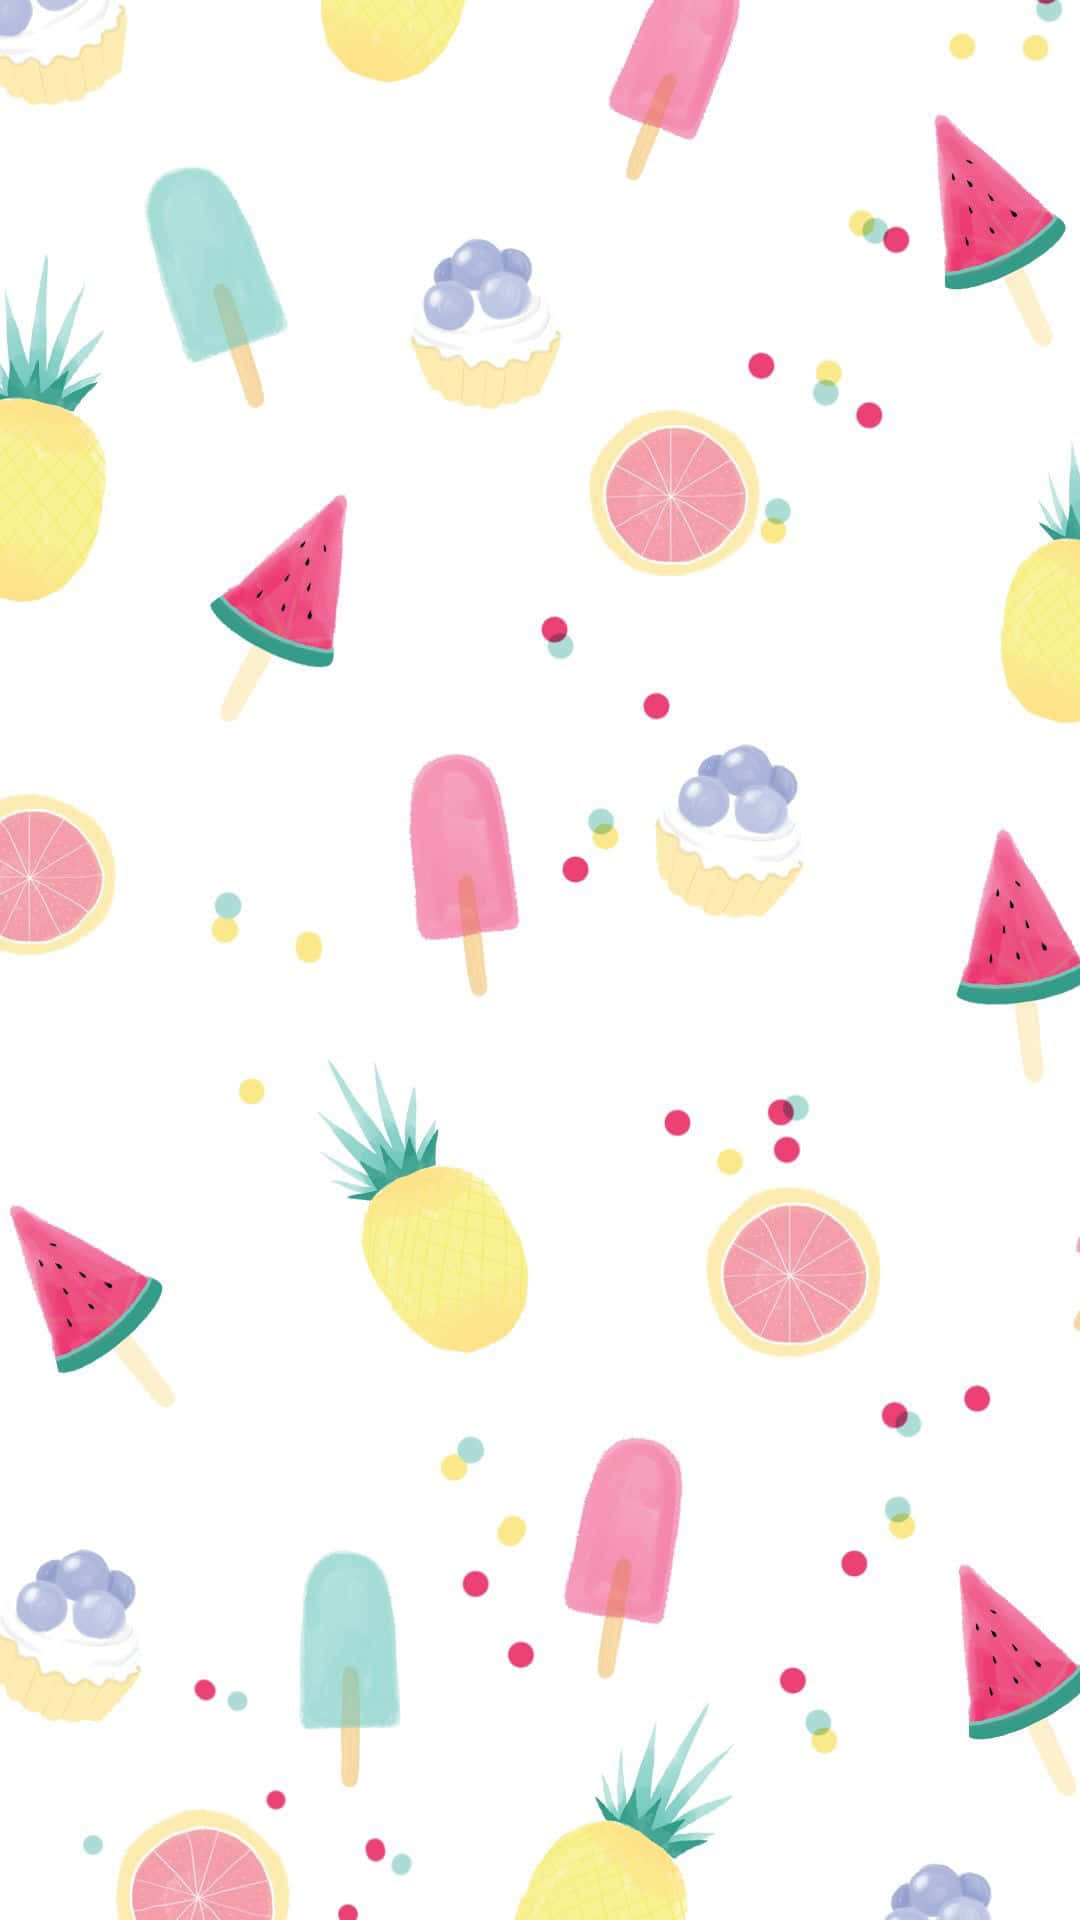 Get Your Hands On This Stylish&Funky Cute Iphone Design Wallpaper